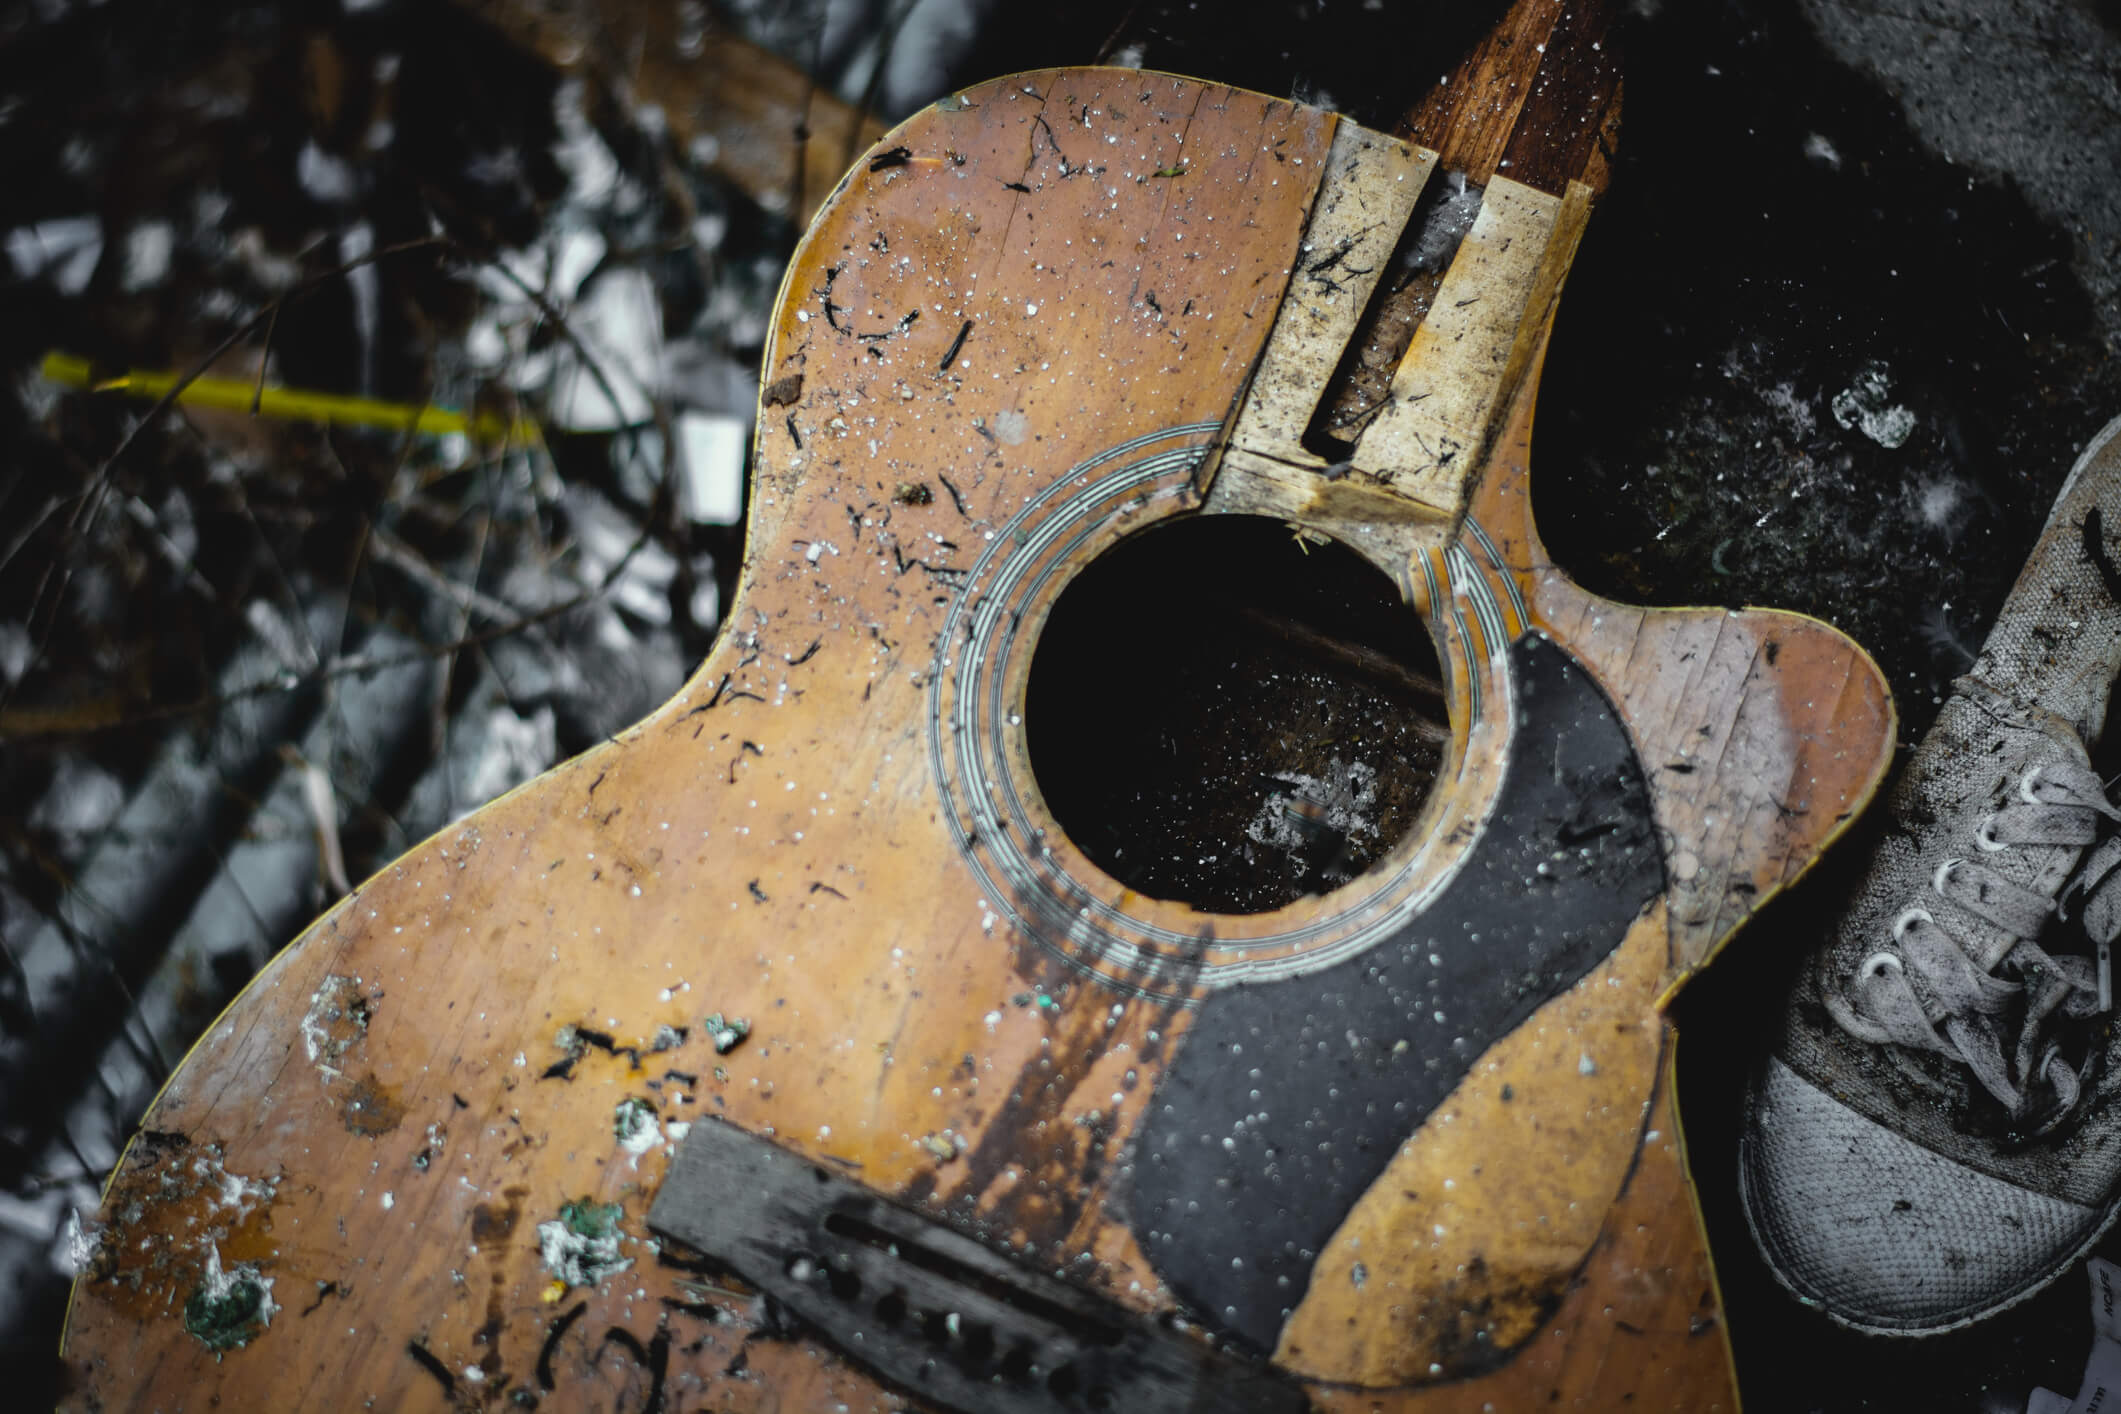 Paul McCartney did not request compensation for the damages to his guitar, nor would he have received it if he'd asked. The Hamptons Subway did, however, offer to find and return all the pieces of his broken instrument.